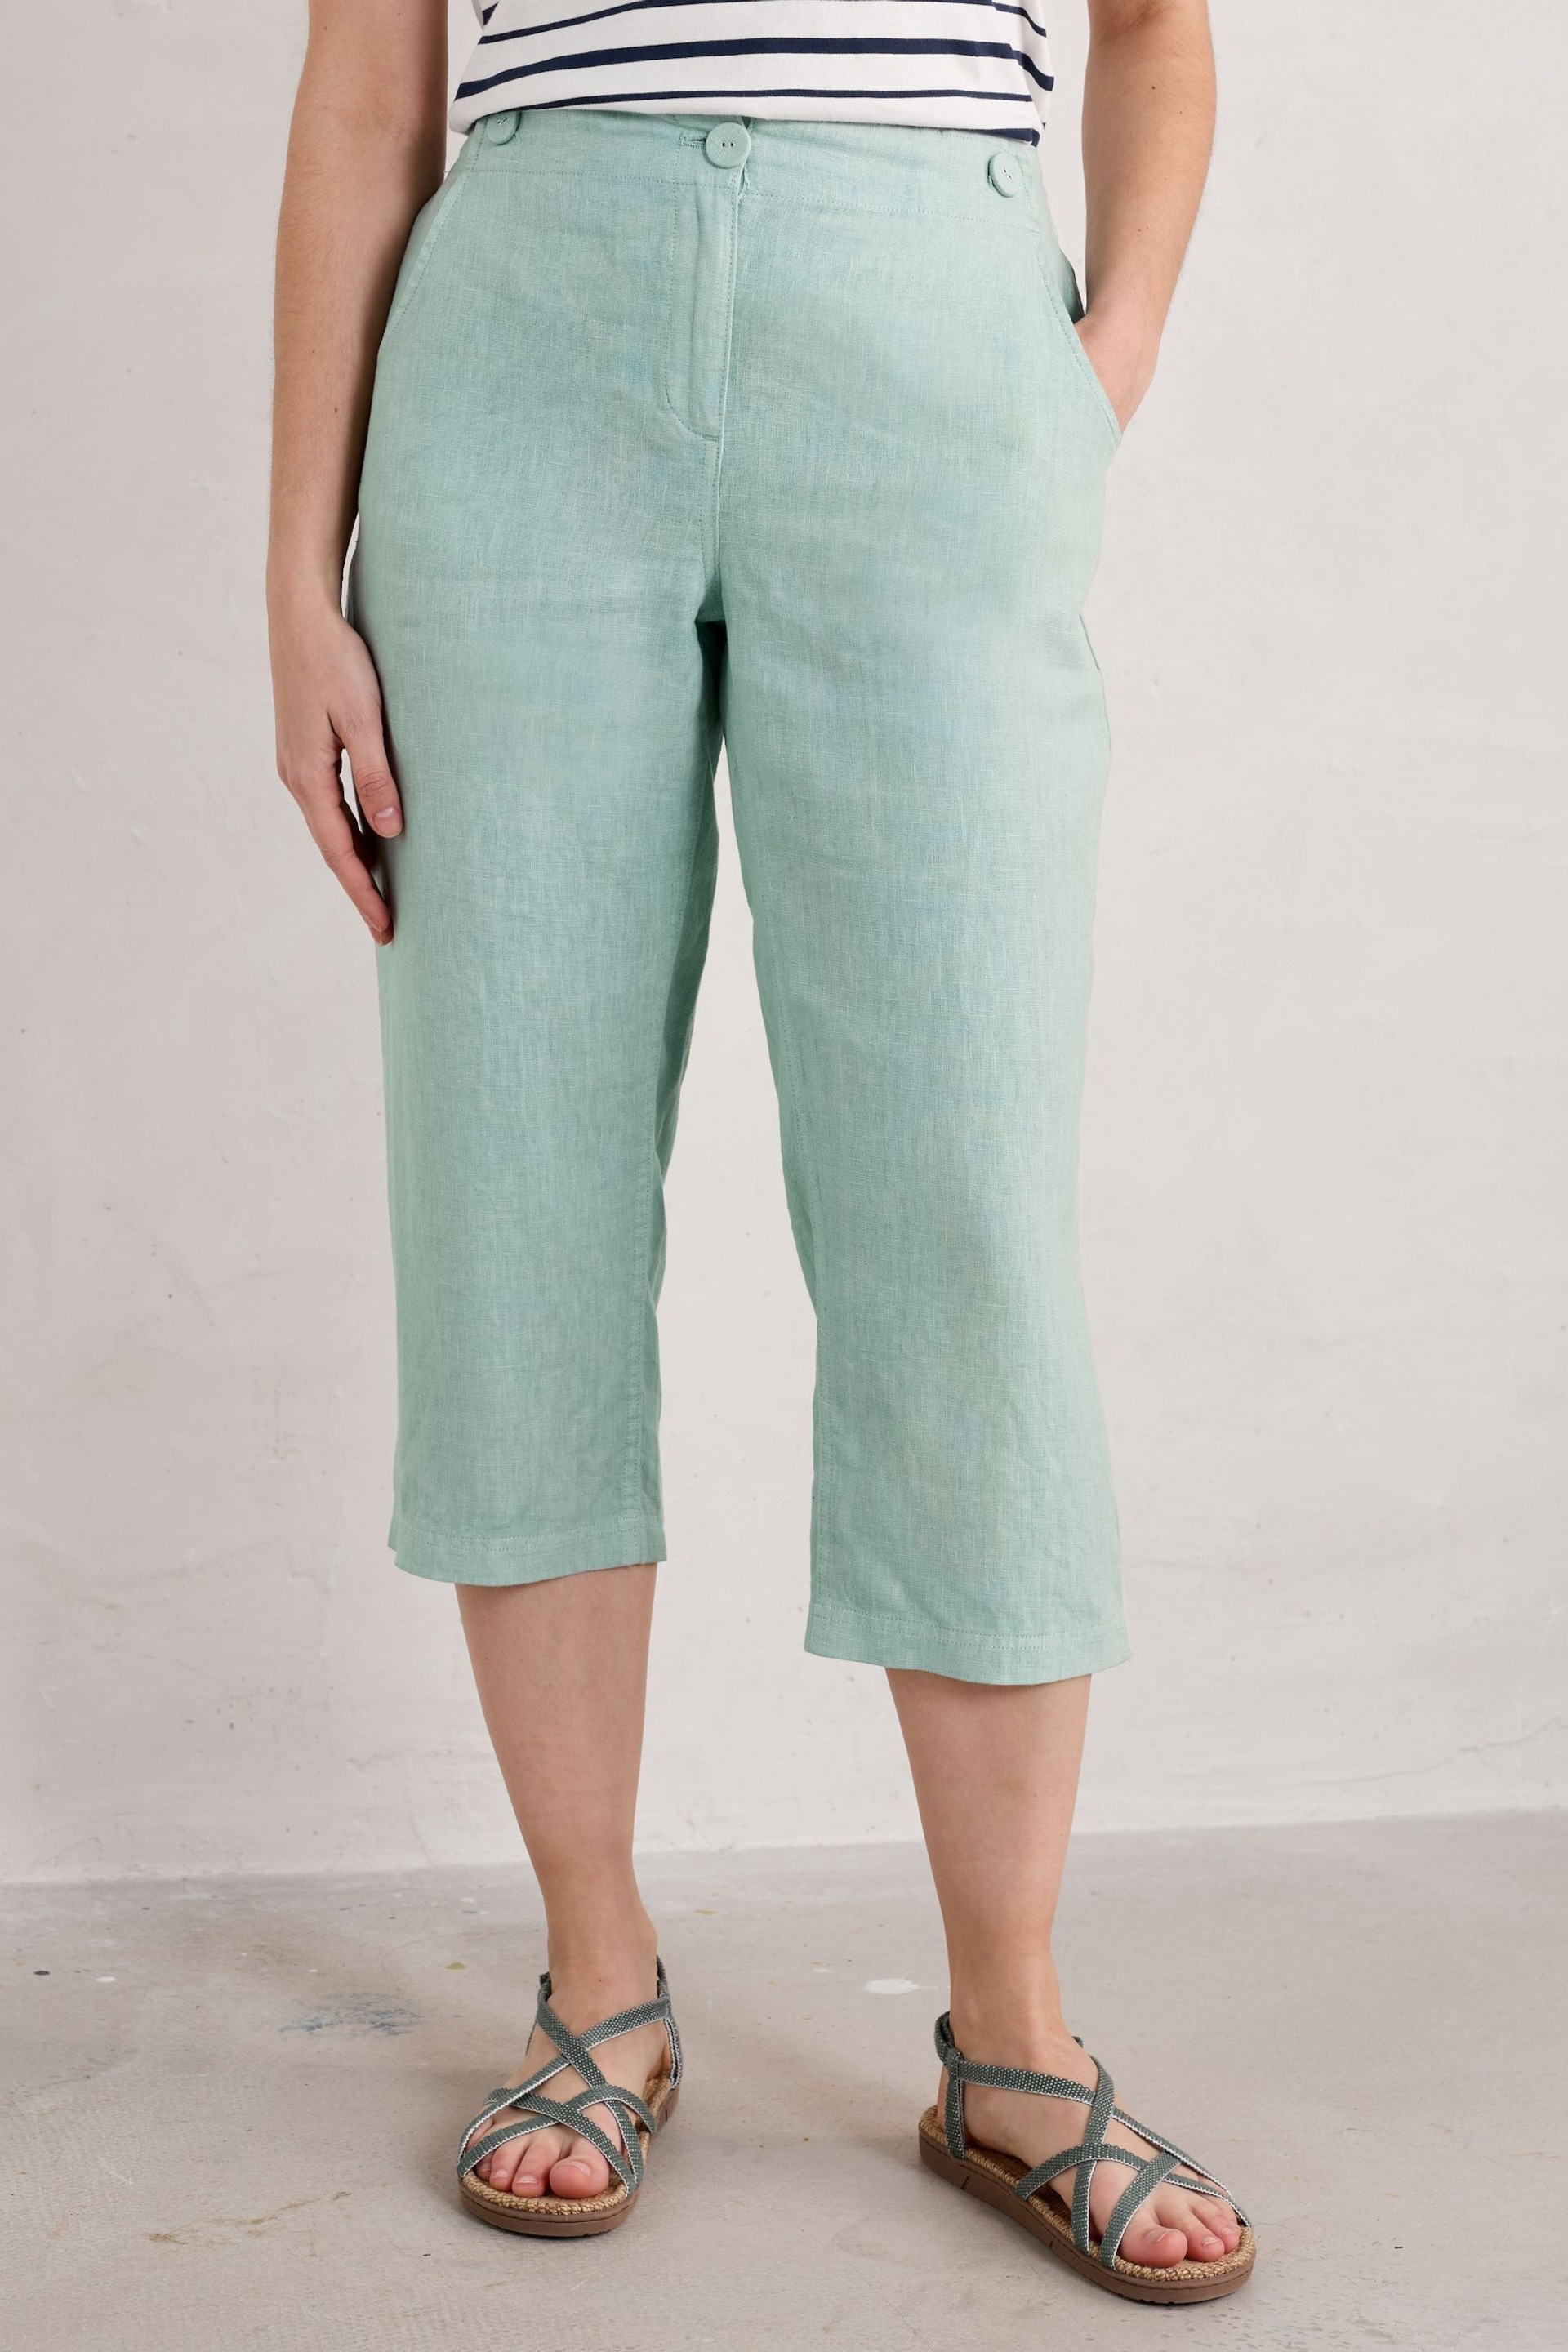 Seasalt Cornwall Green Brawn Point Crops Trousers - Image 1 of 5